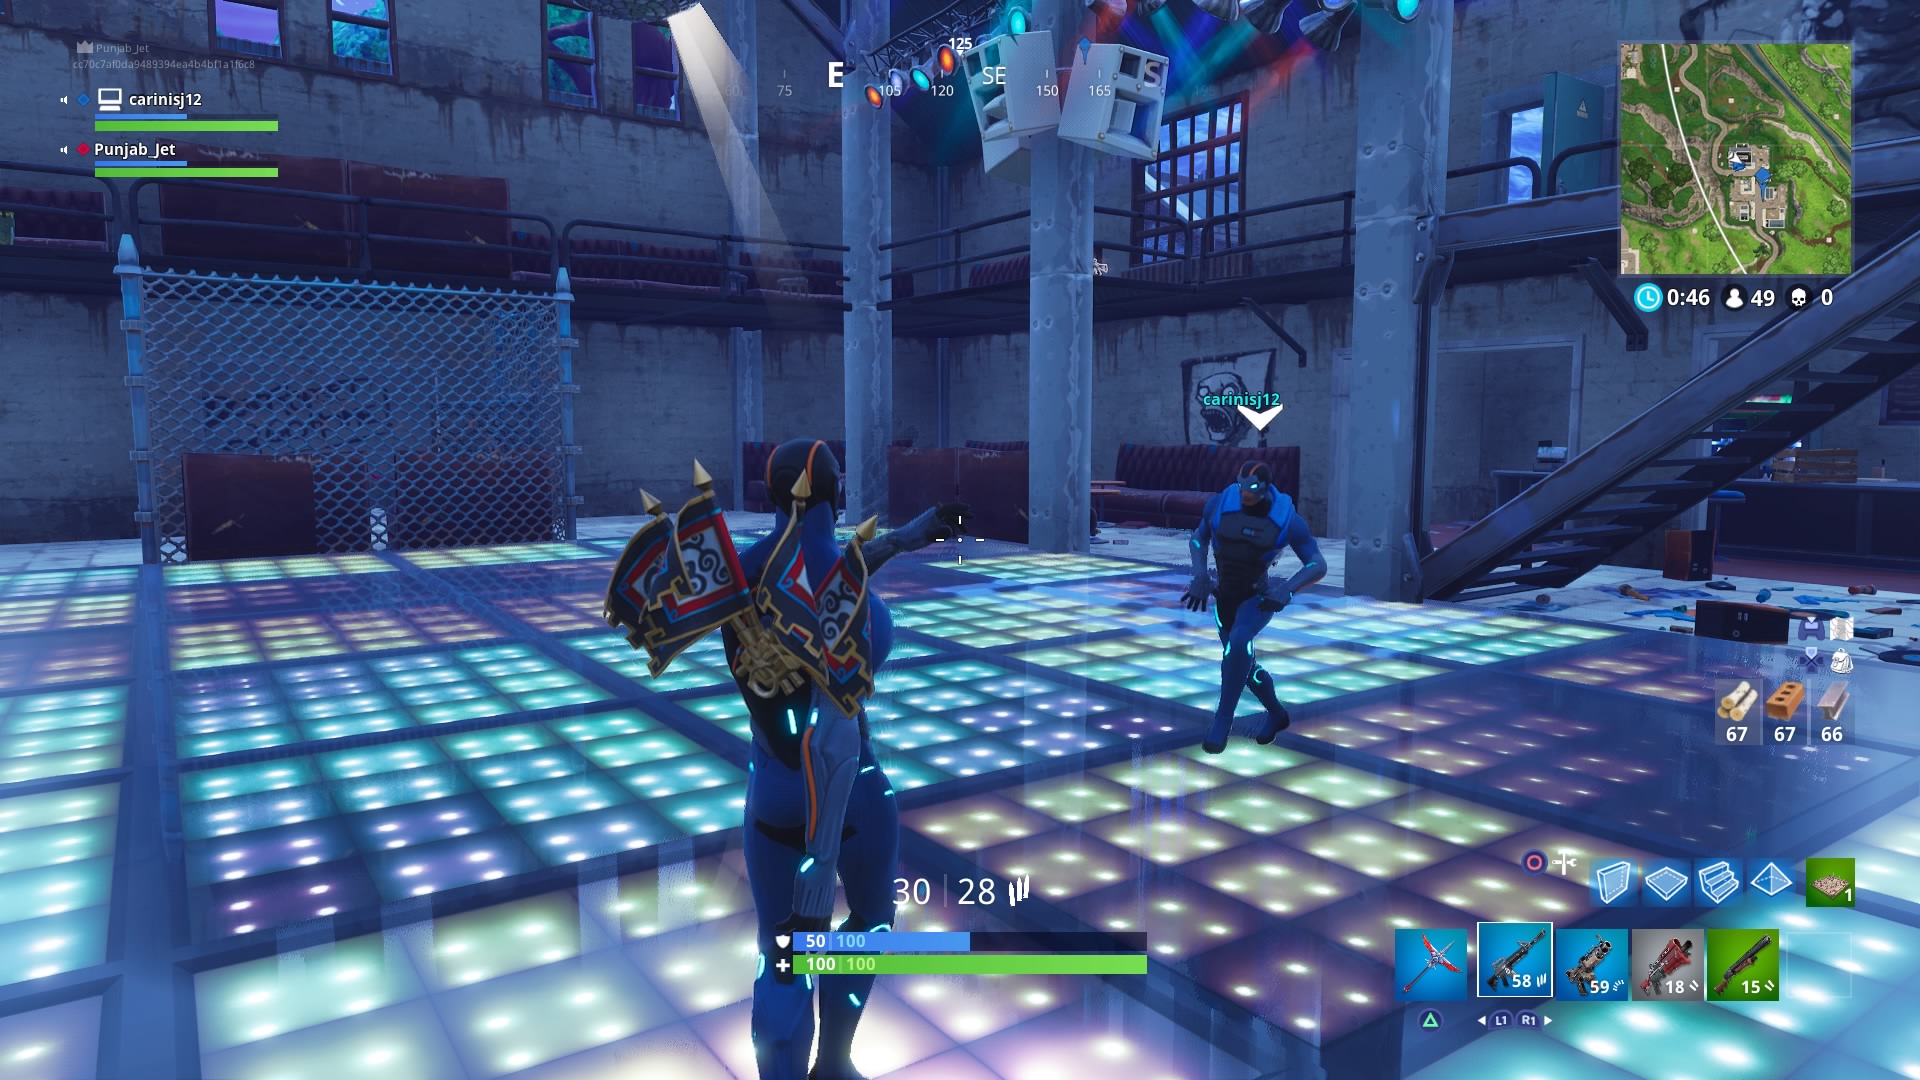 Fortnite Dance Computer Background 517 1920x1080 px